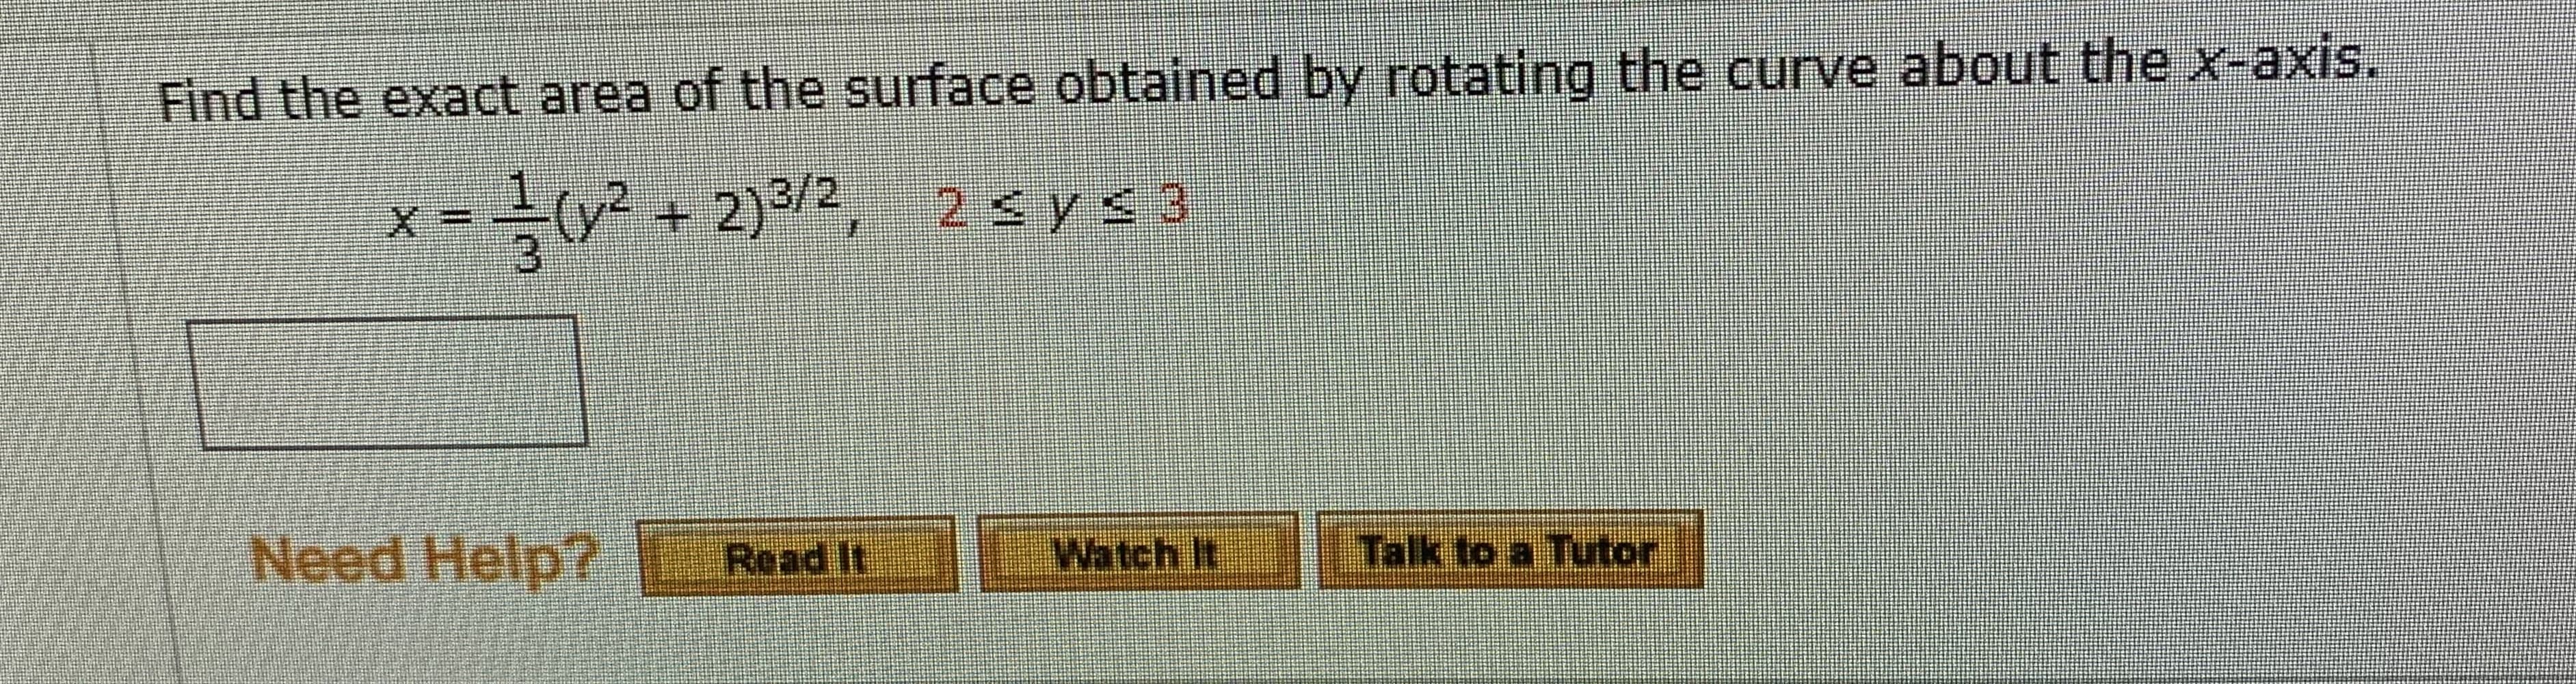 ind the exact area of the surface obtained bY rotaing
-- 2)2,
2sys3
